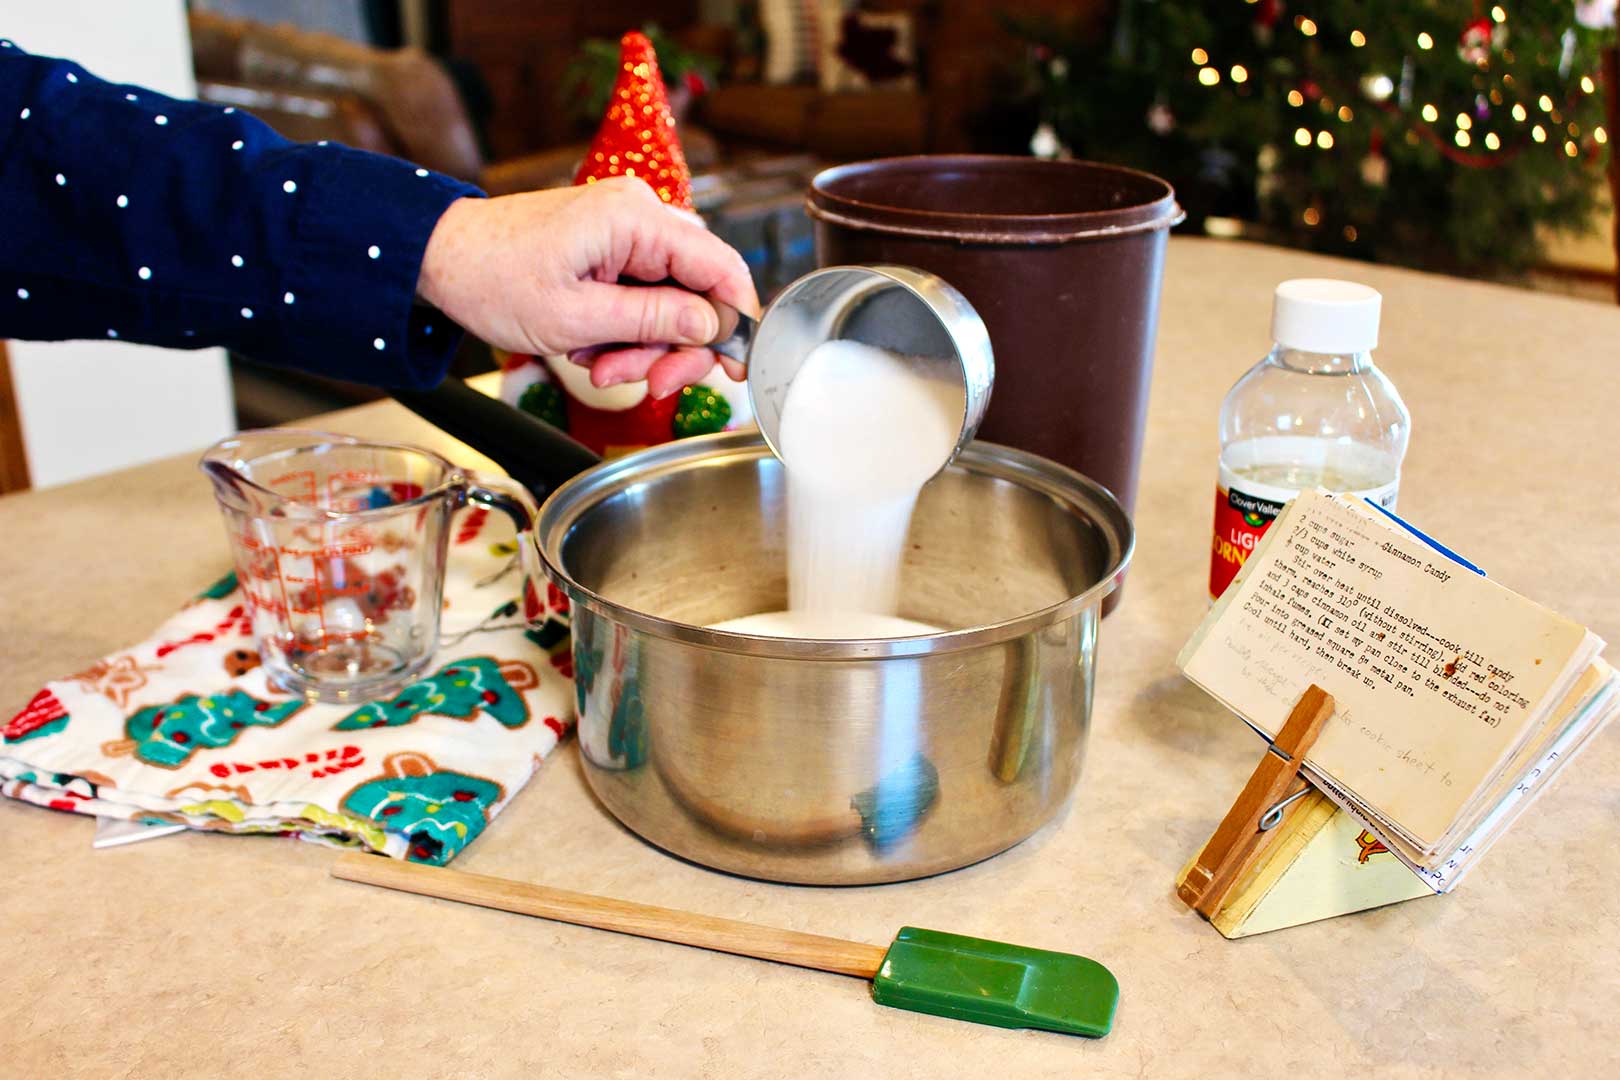 Hand pouring cup of sugar into saucepan on the countertop with other components of the cinnamon candy near by.